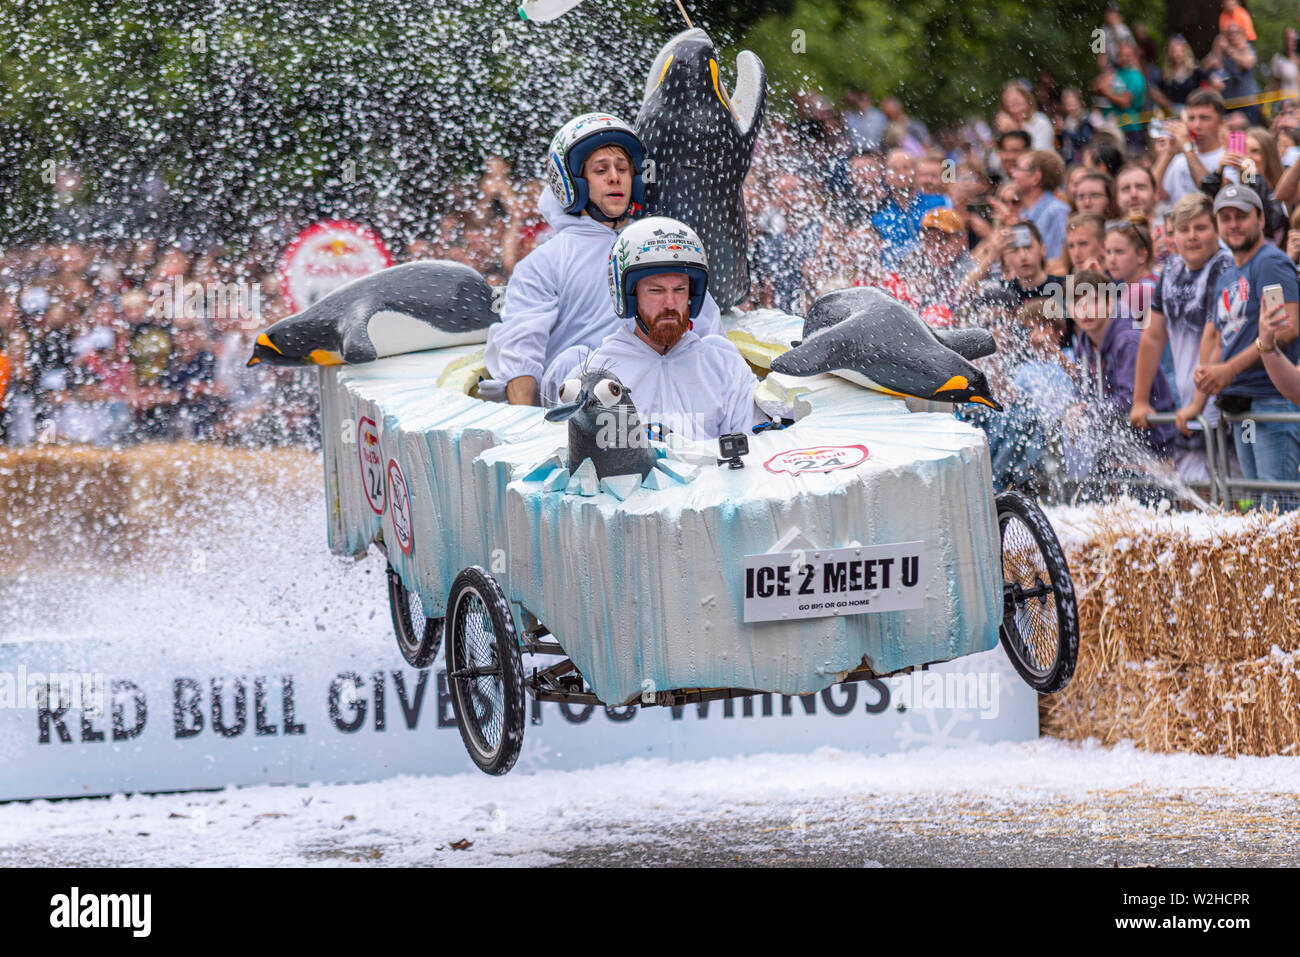 Polar Express competing in the Red Bull Soapbox Race 2019 at Alexandra Park, London, UK. Jumping over ramp with people Stock Photo